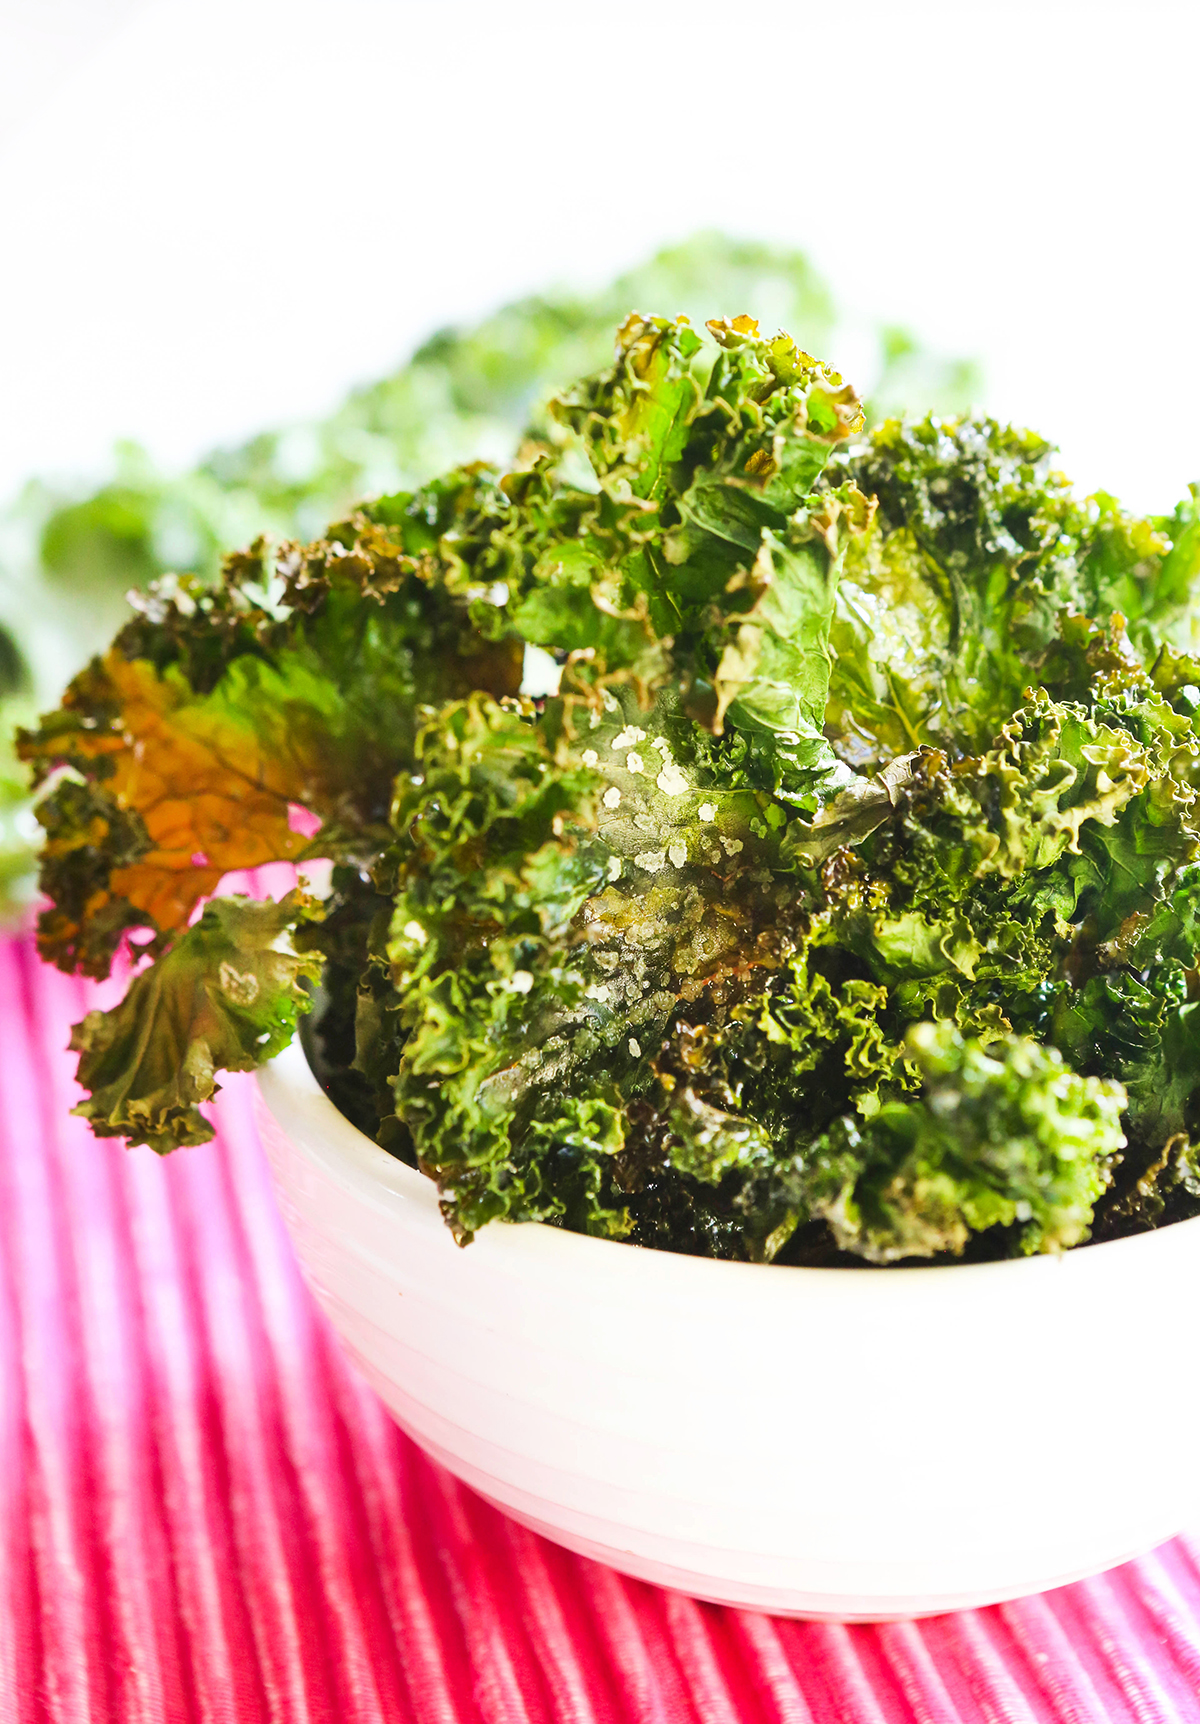 Bowl full of crispy kale with fresh uncooked kale on the side.